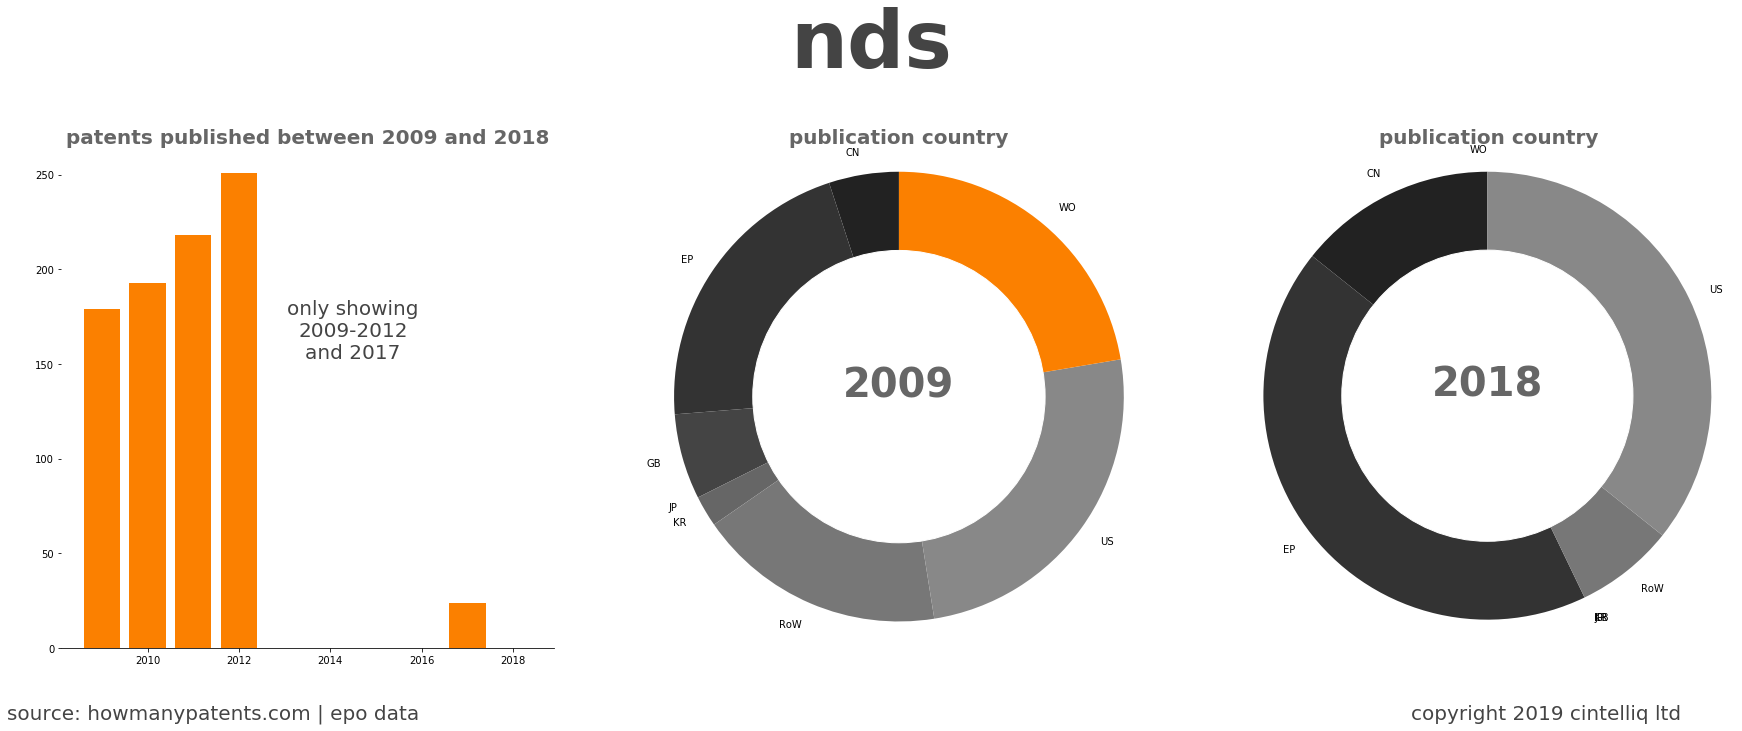 summary of patents for Nds